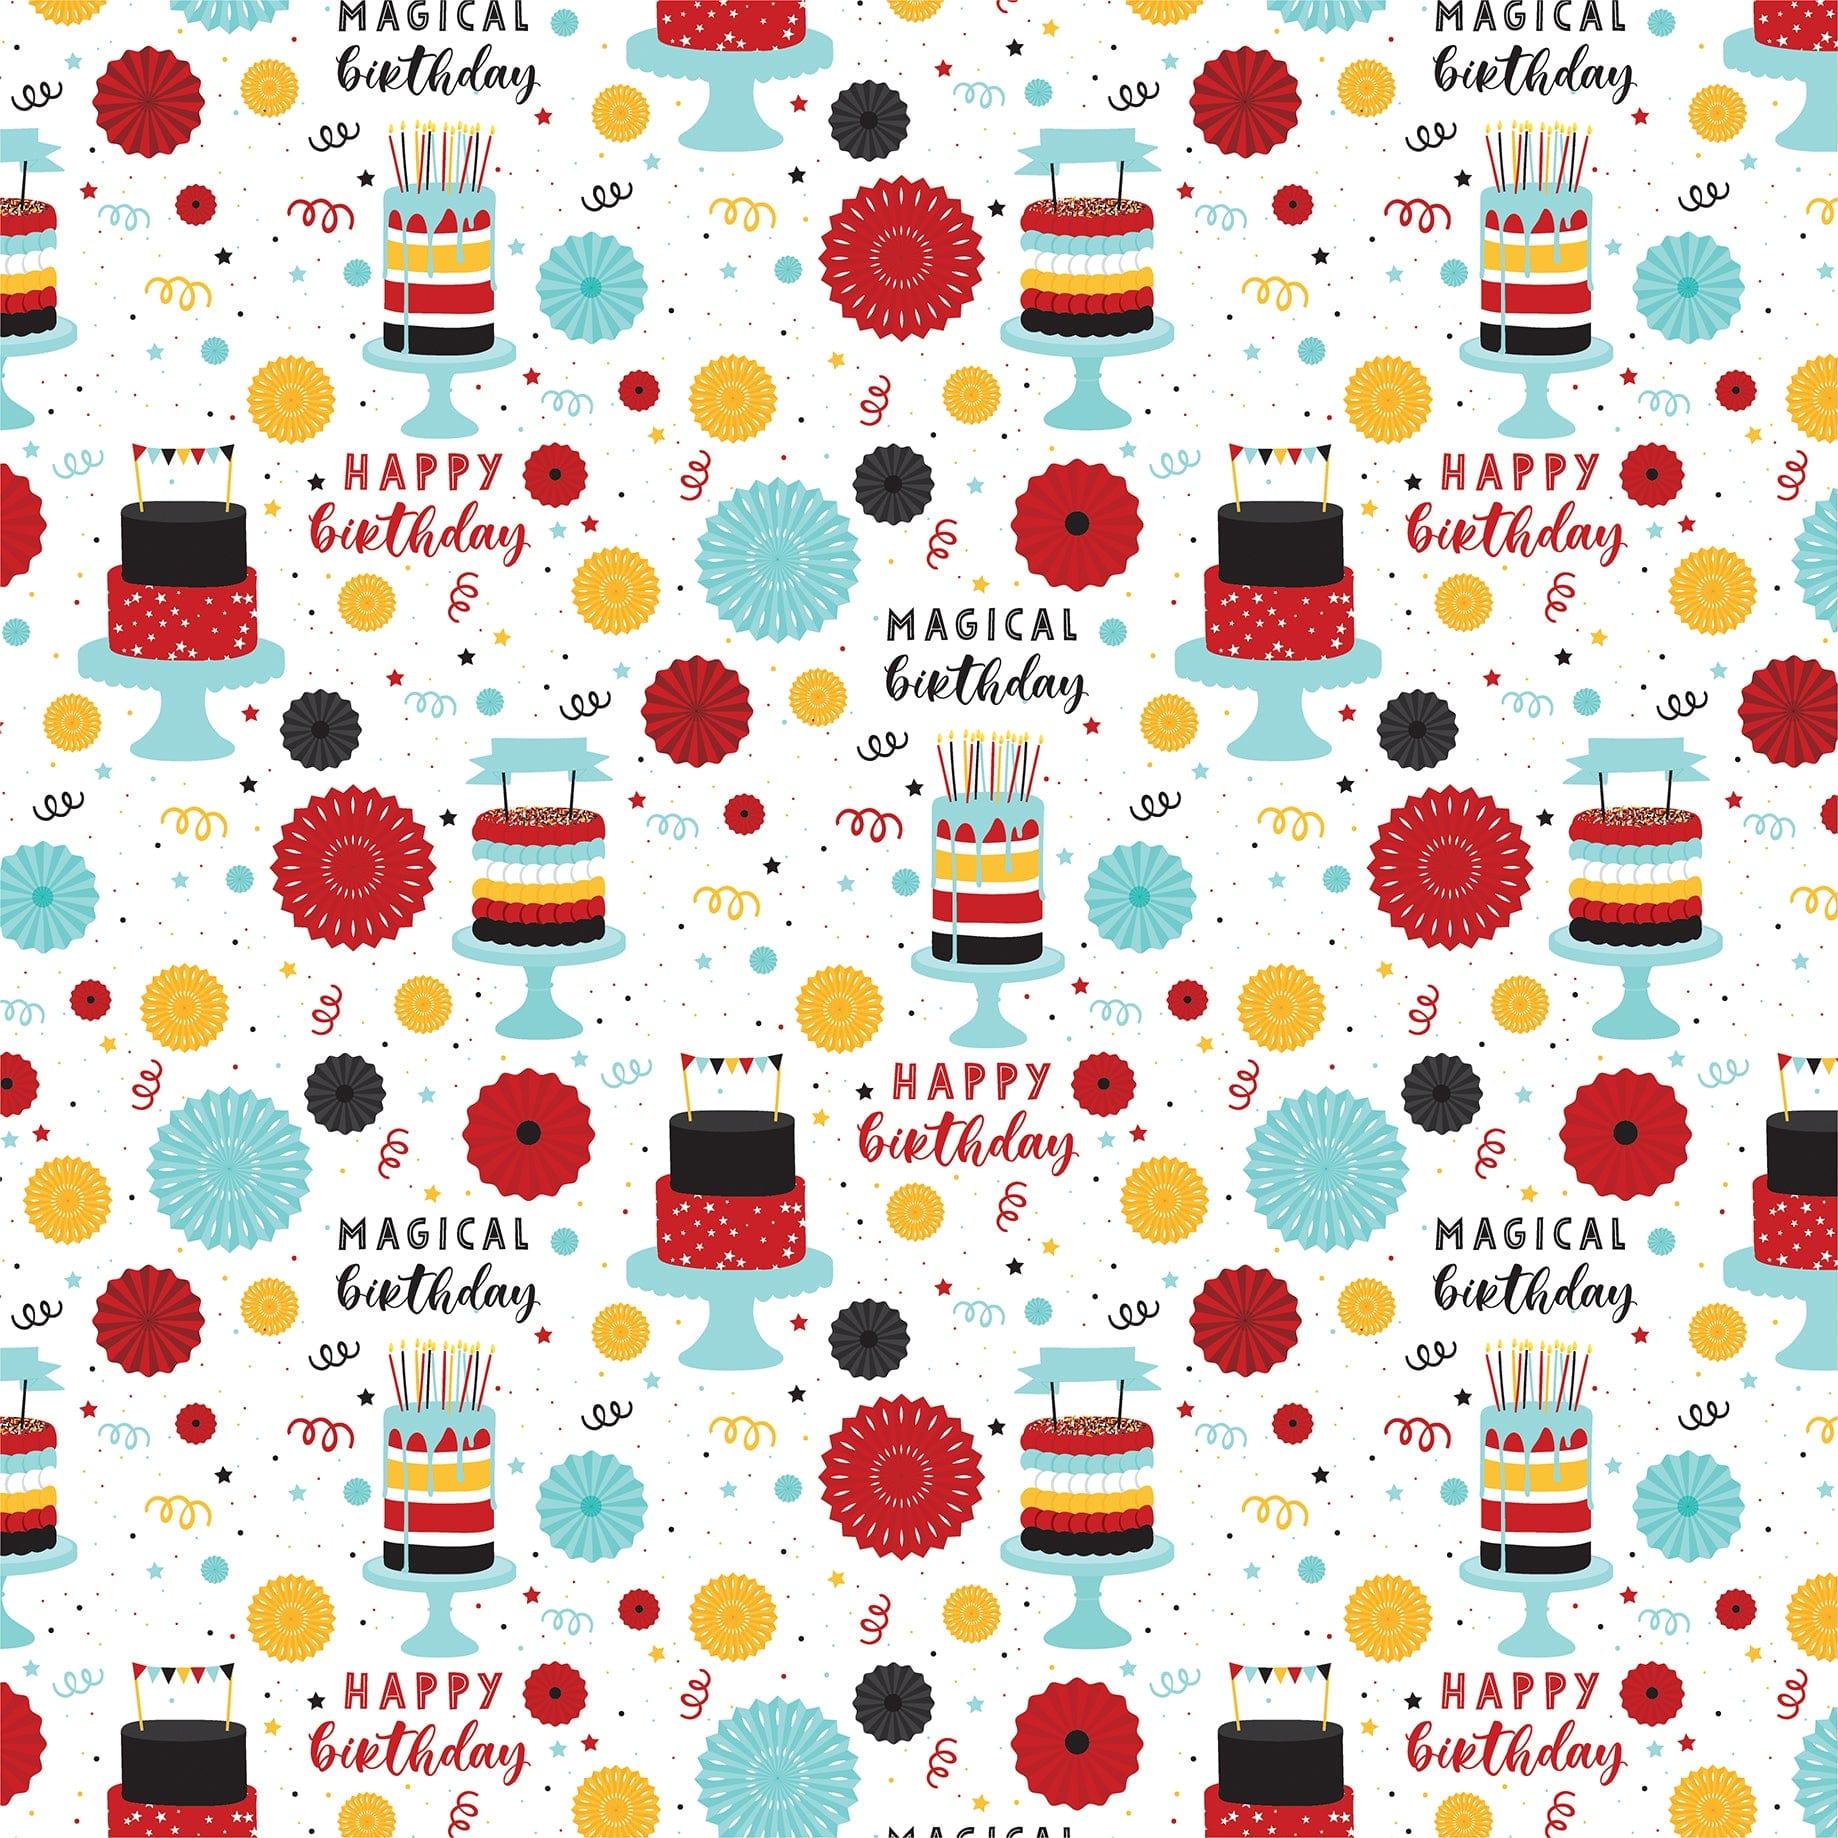 Magical Birthday Boy Collection Make A Wish 12 x 12 Double-Sided Scrapbook Paper by Echo Park Paper - Scrapbook Supply Companies